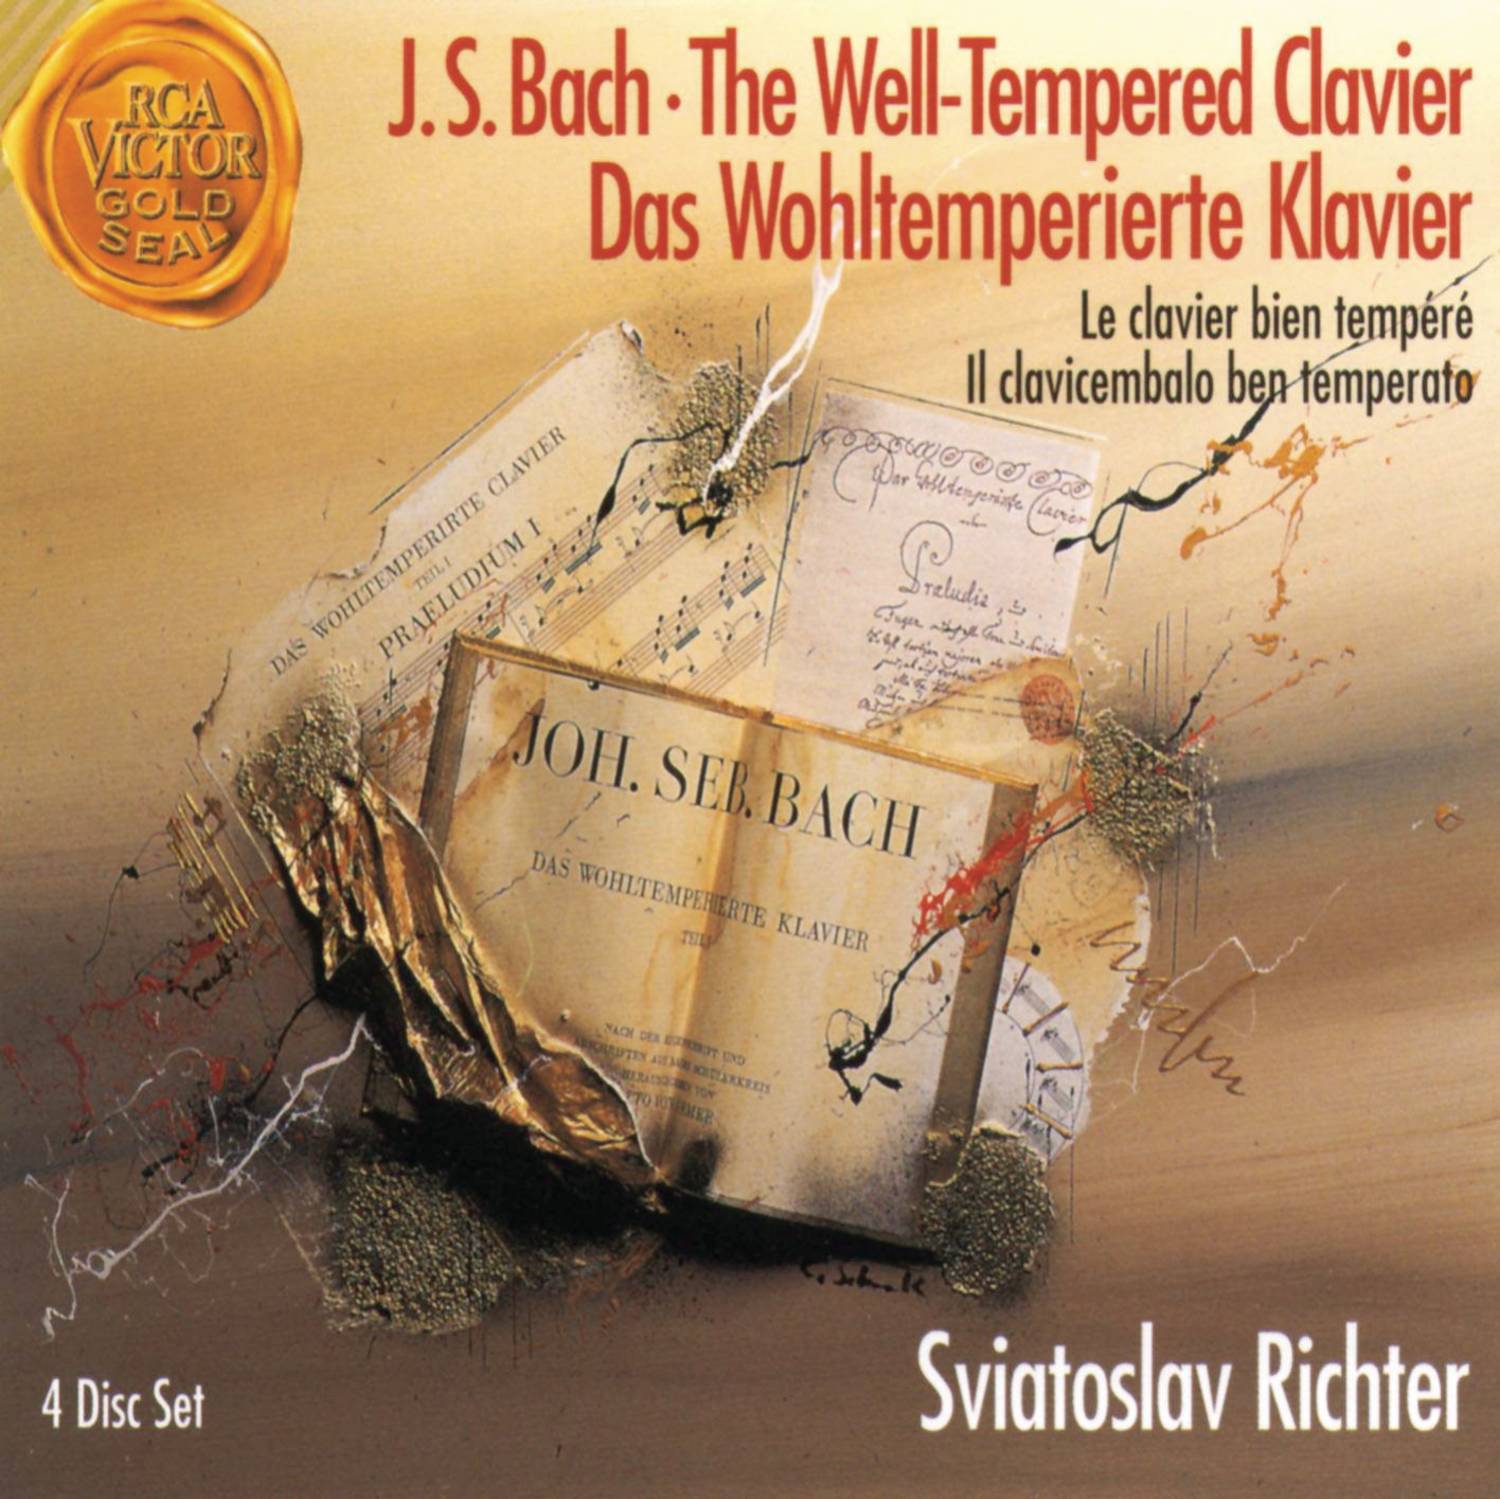 The Well-Tempered Clavier, Book 1:Prelude and Fugue No. 15 in G Major, BWV 860